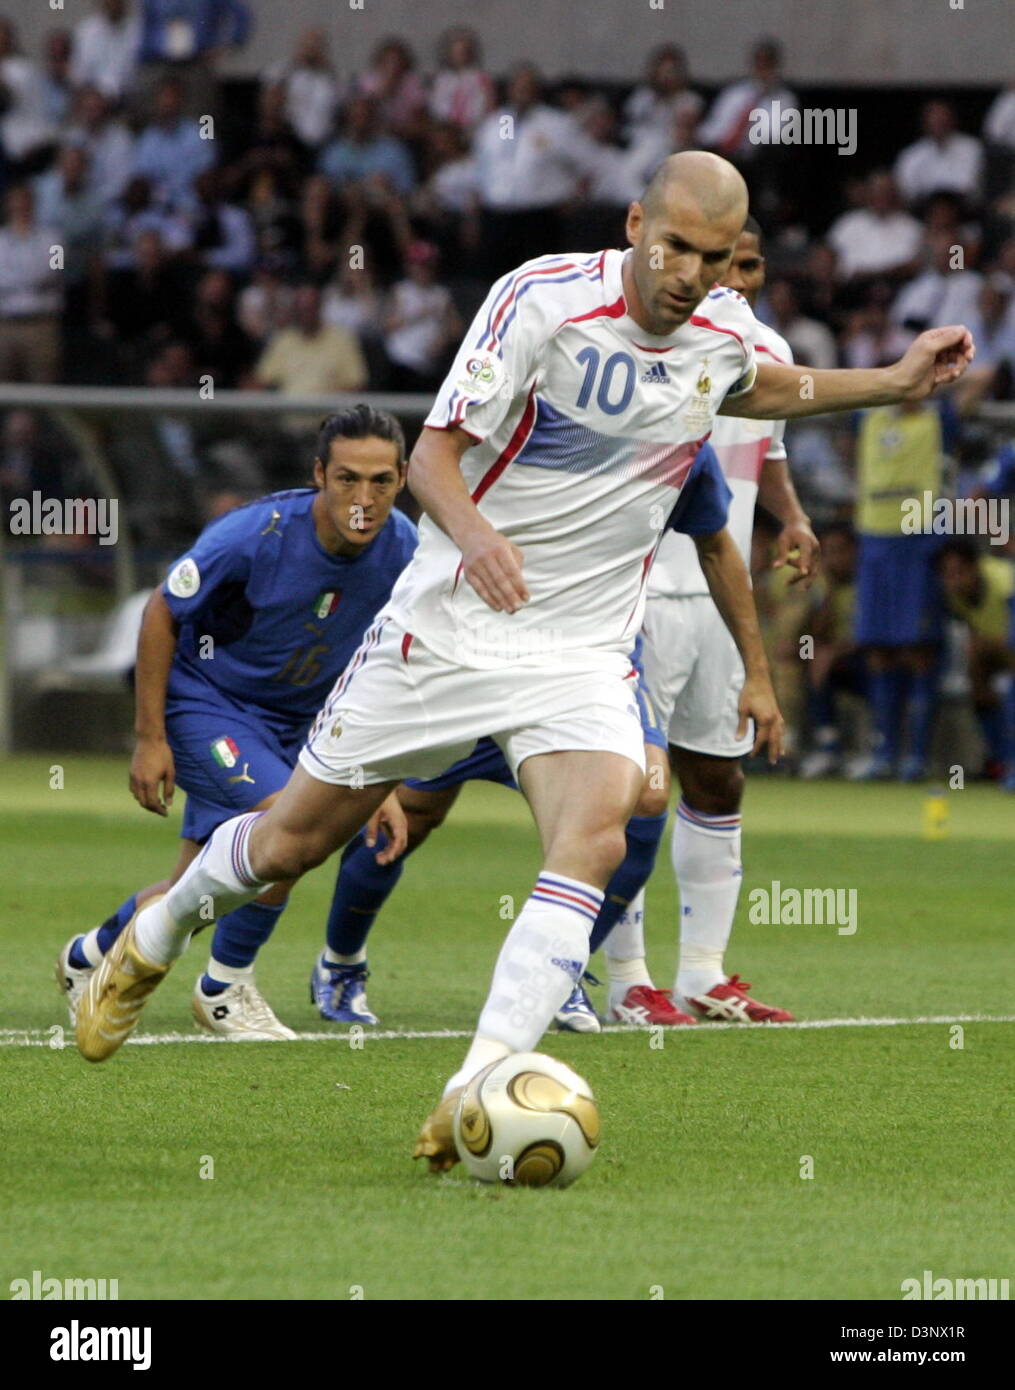 French Zinedine Zidane scores the penalty shot leading to the 1-0 during the final of the 2006 FIFA World Cup Italy vs. France at the Olympic Stadium in Berlin, Germany, Sunday 09 July 2006. Photo: ROLAND WEIHRAUCH +++ Mobile Services OUT +++ Please refer to FIFA's Terms and Conditions. Stock Photo